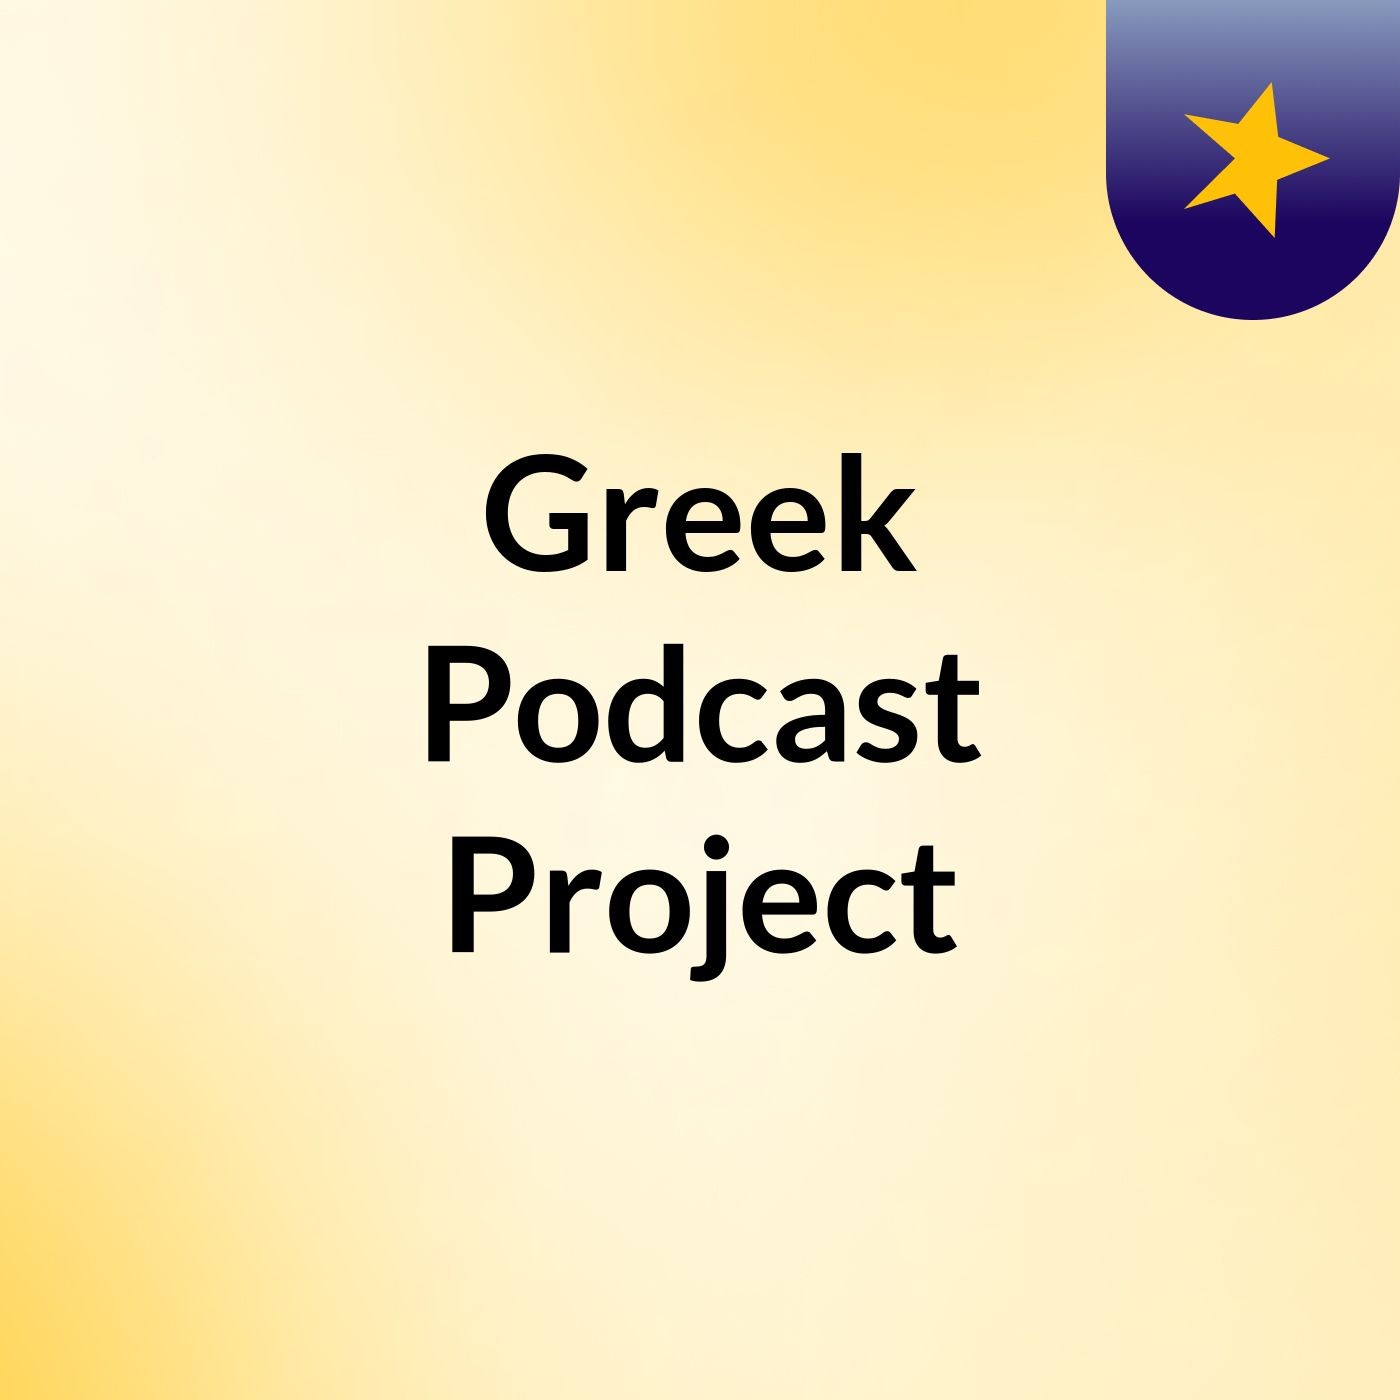 Greek Podcast Project